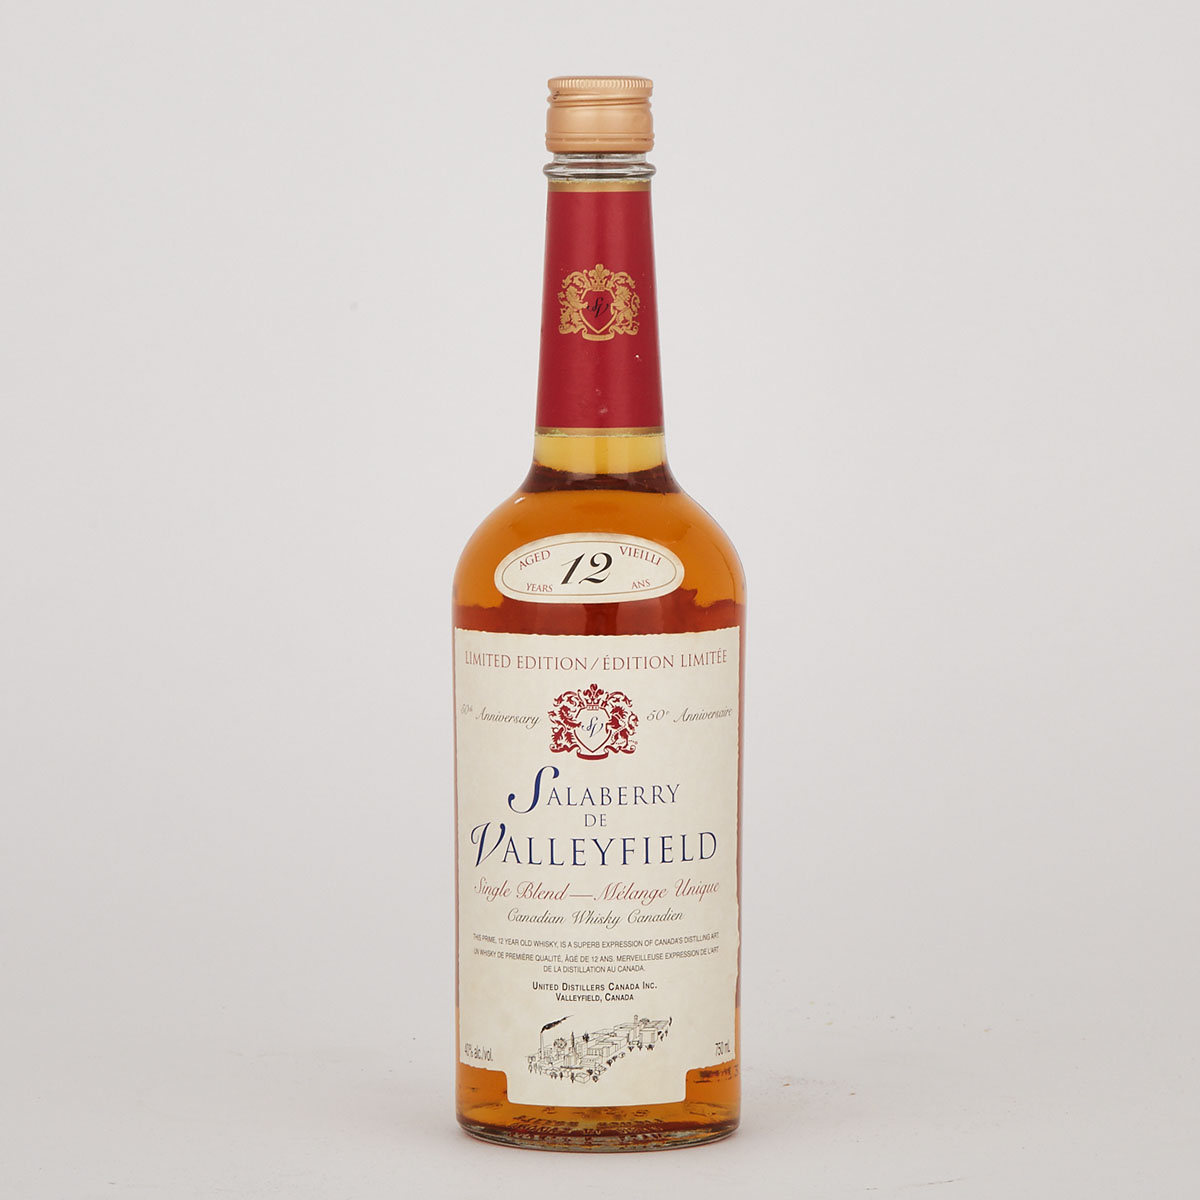 SALABERRY DE VALLEYFIELD SINGLE BLEND CANADIAN WHISKY  (1)